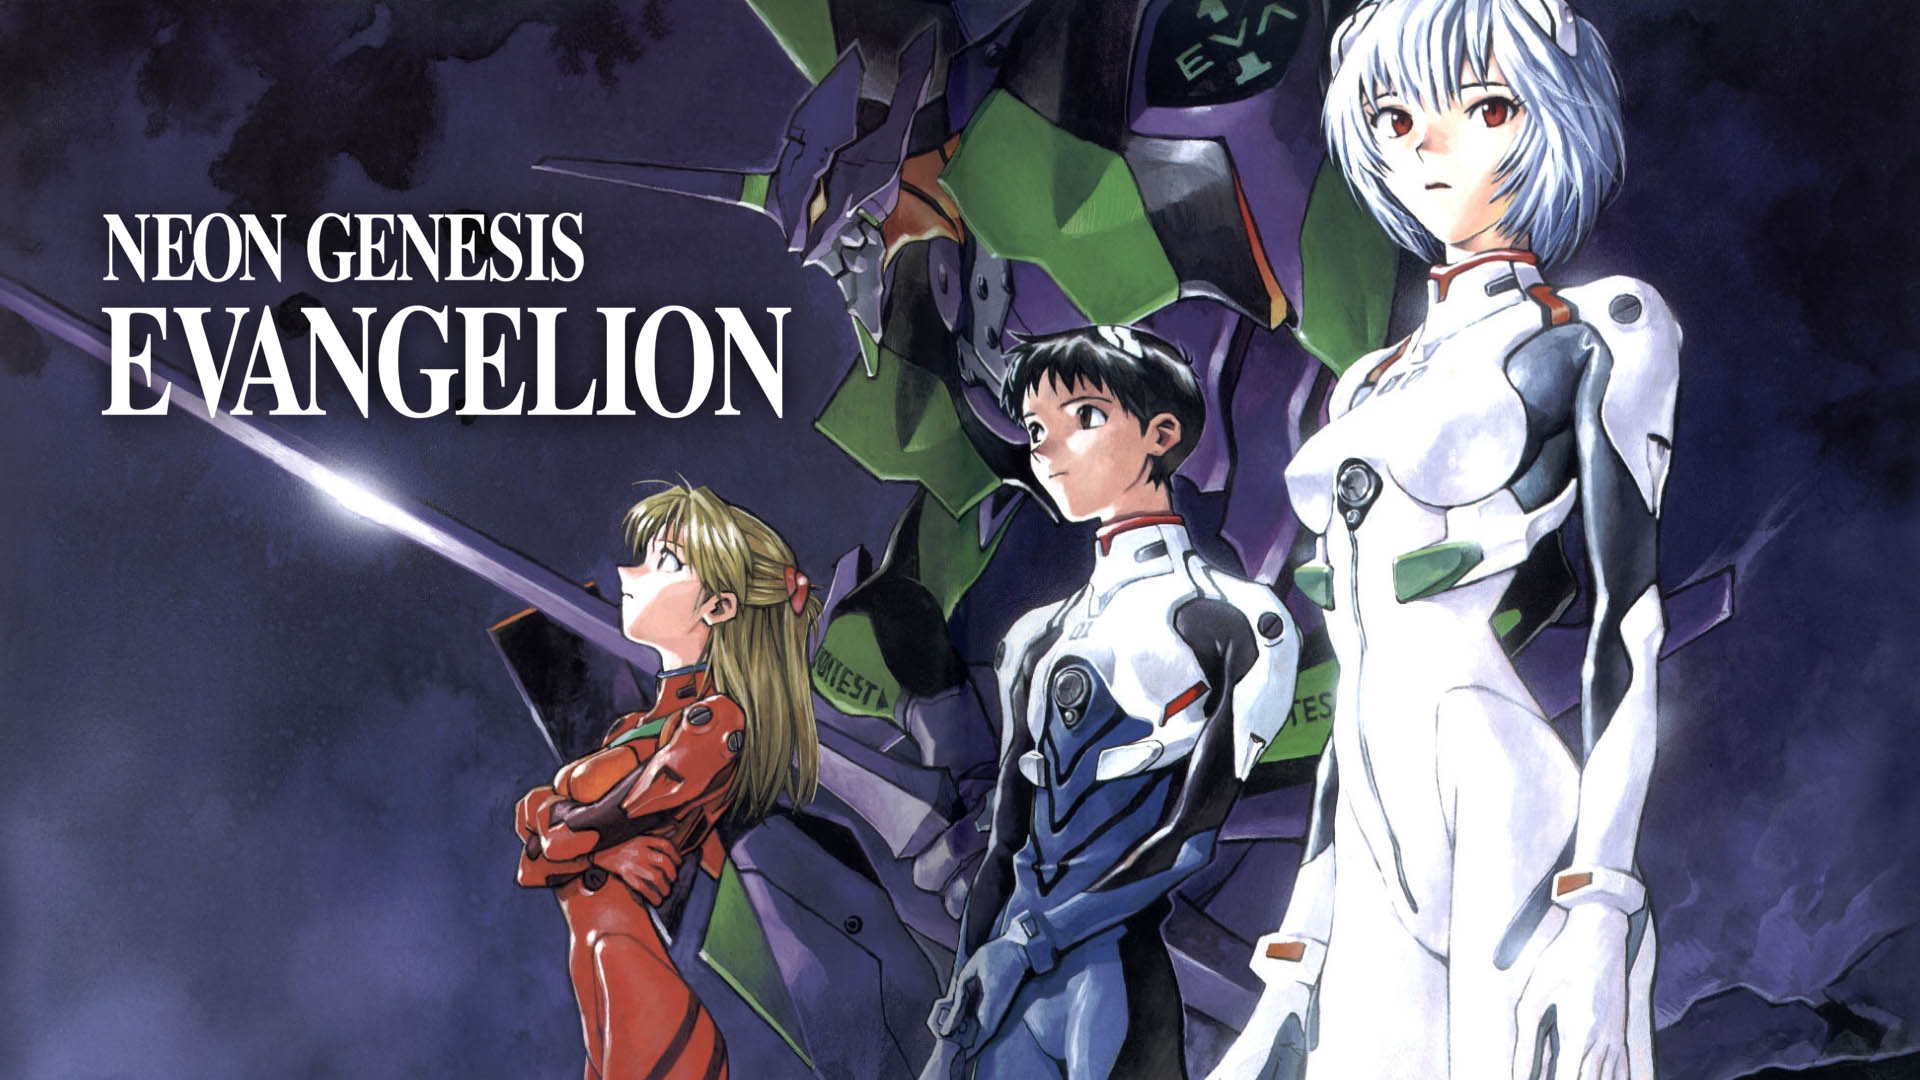 Neon Genesis Evangelion Collector’s Edition Blu-ray Review